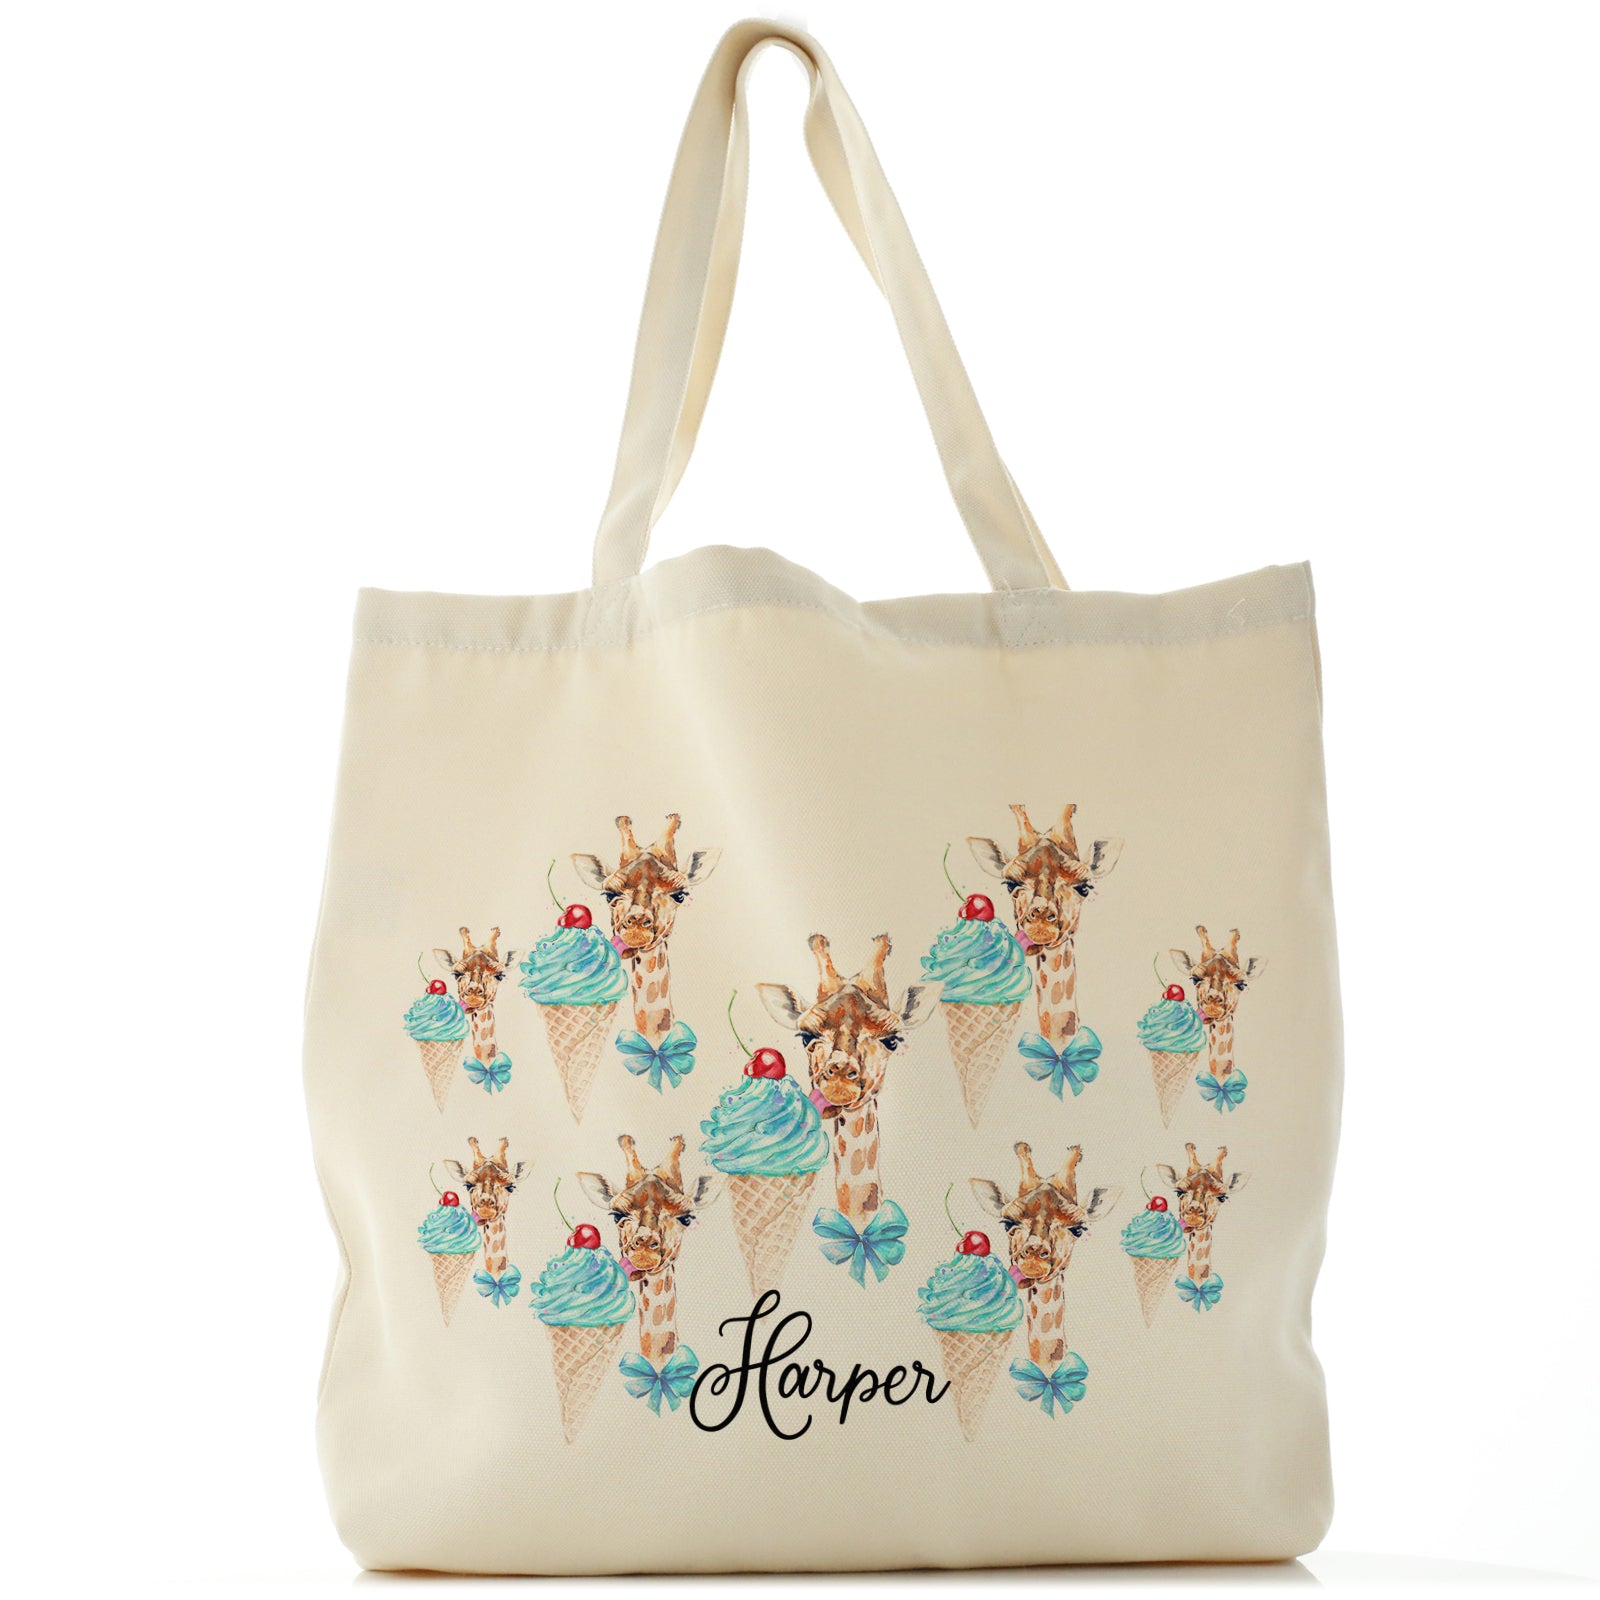 Personalised Canvas Tote Bag with Giraffe Blue Ice creams and Cute Text